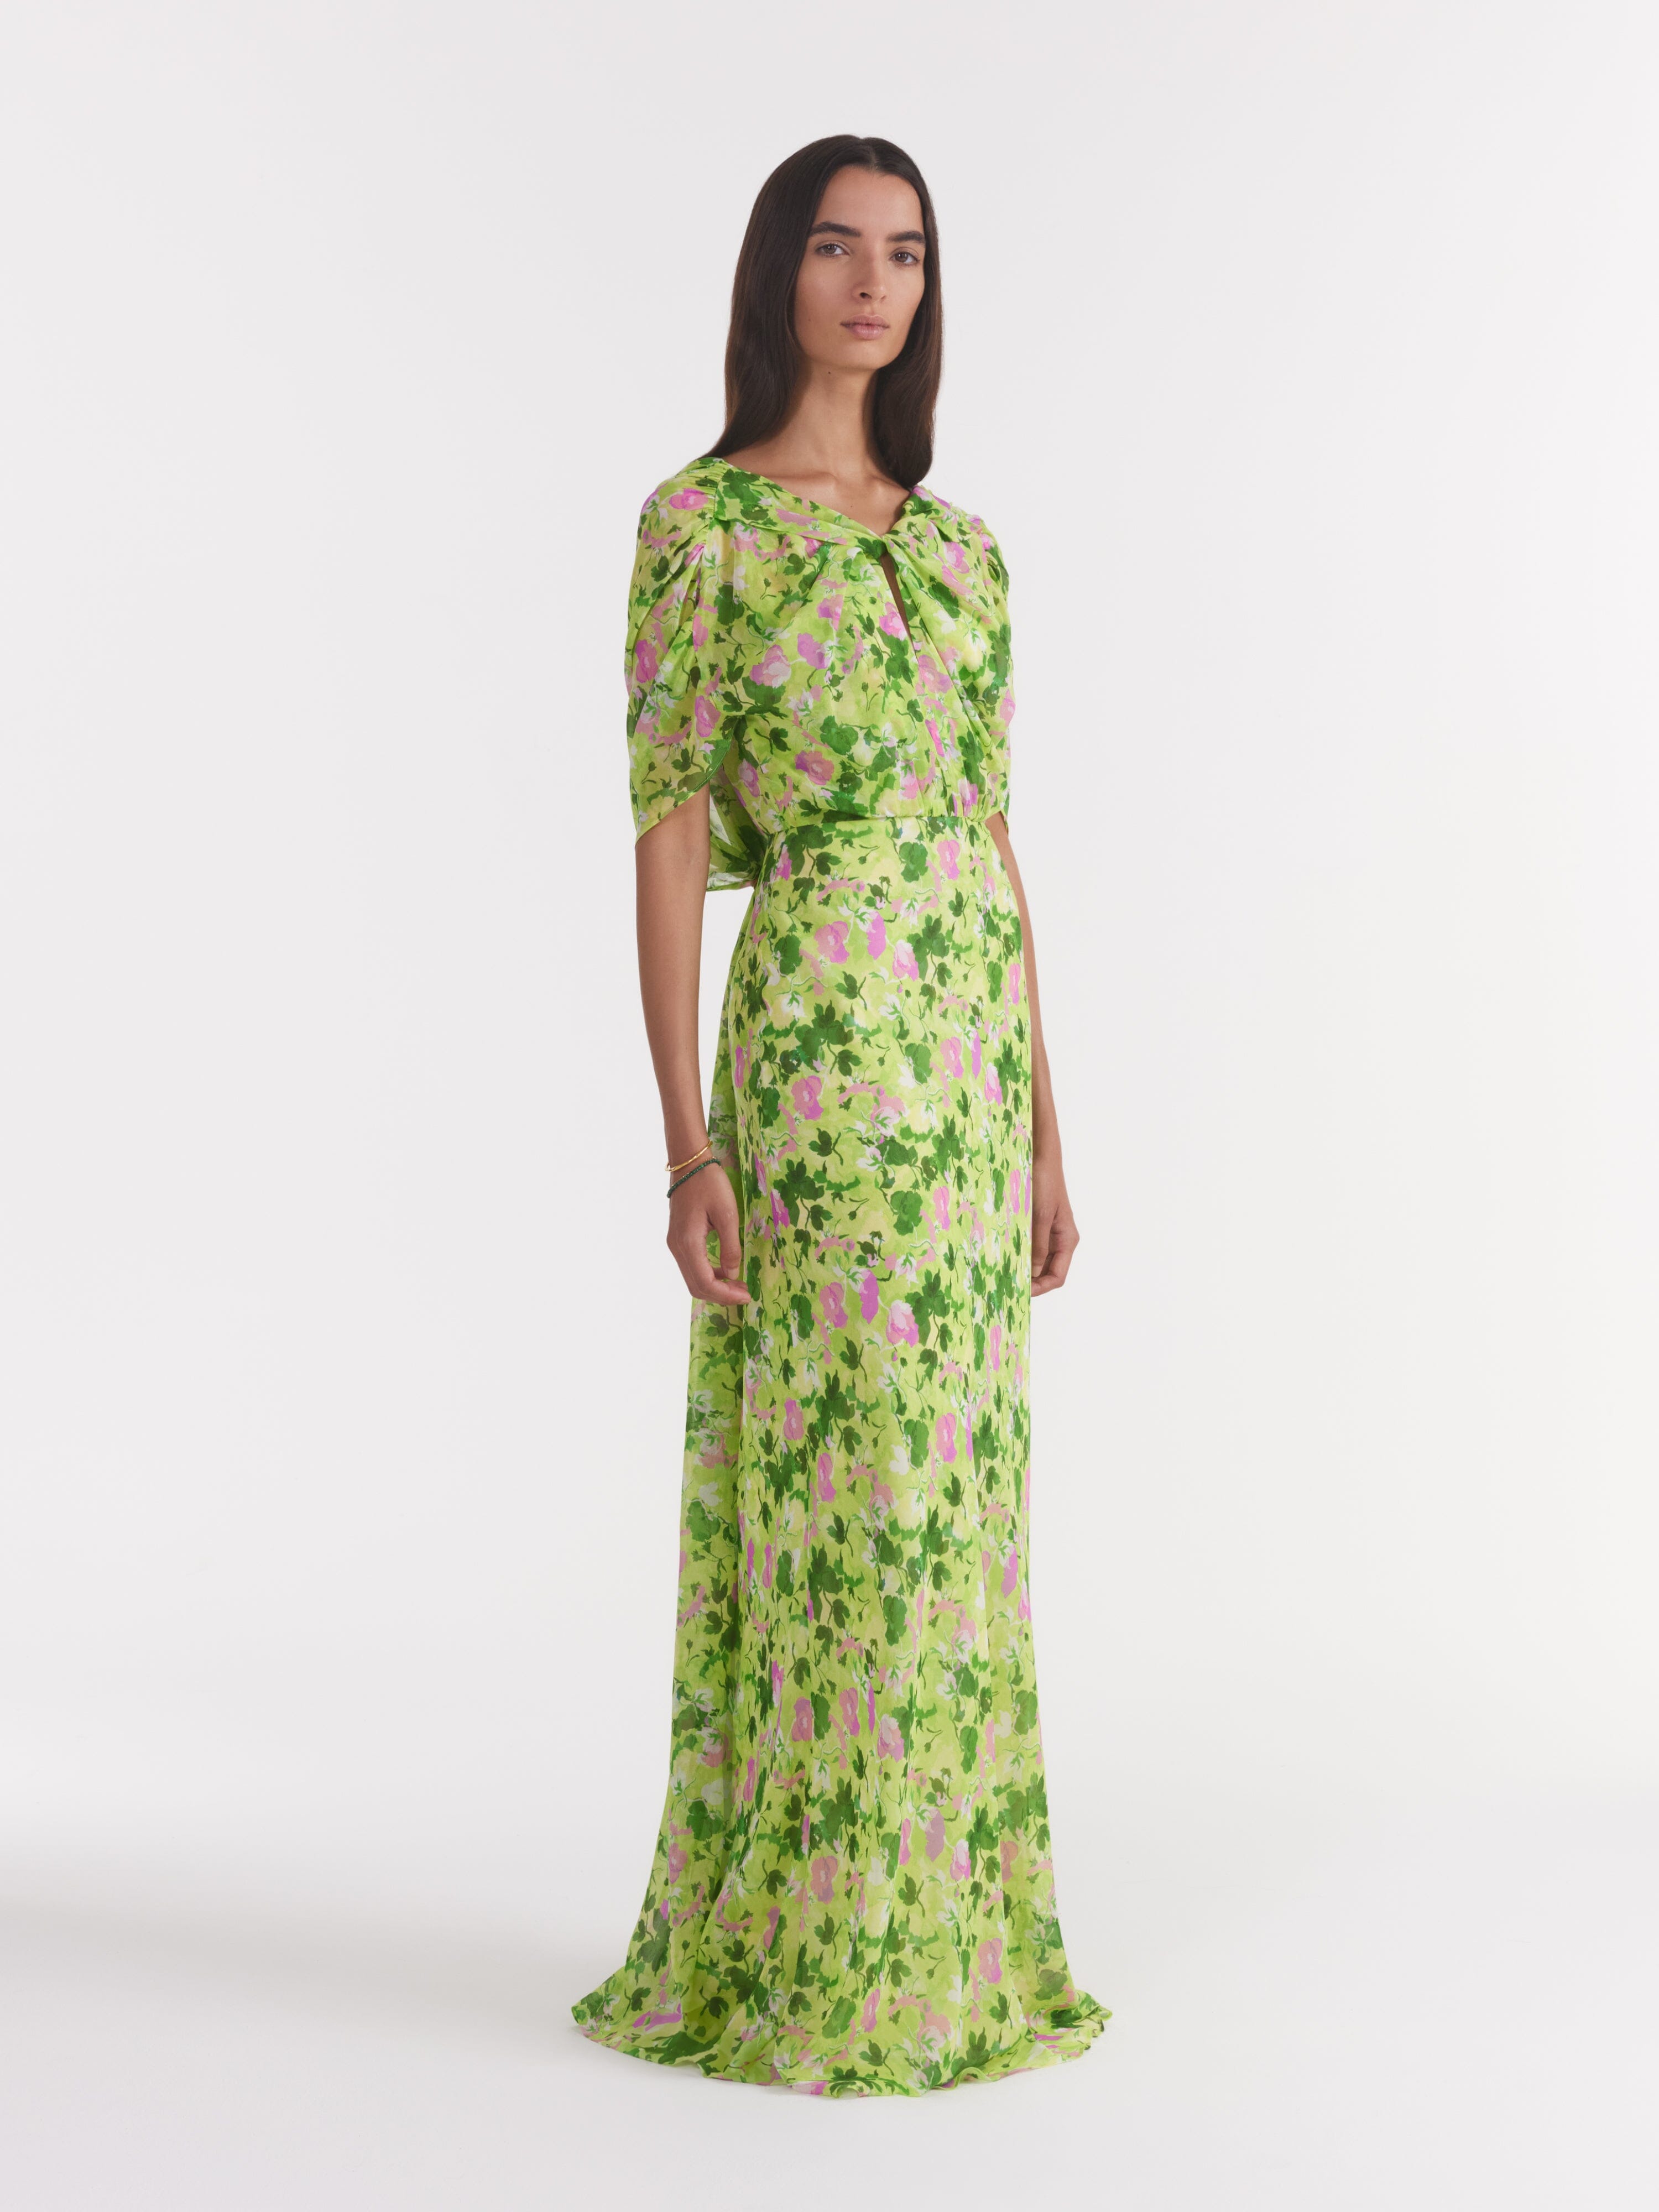 Claudia Cape Dress in Poppies Lime